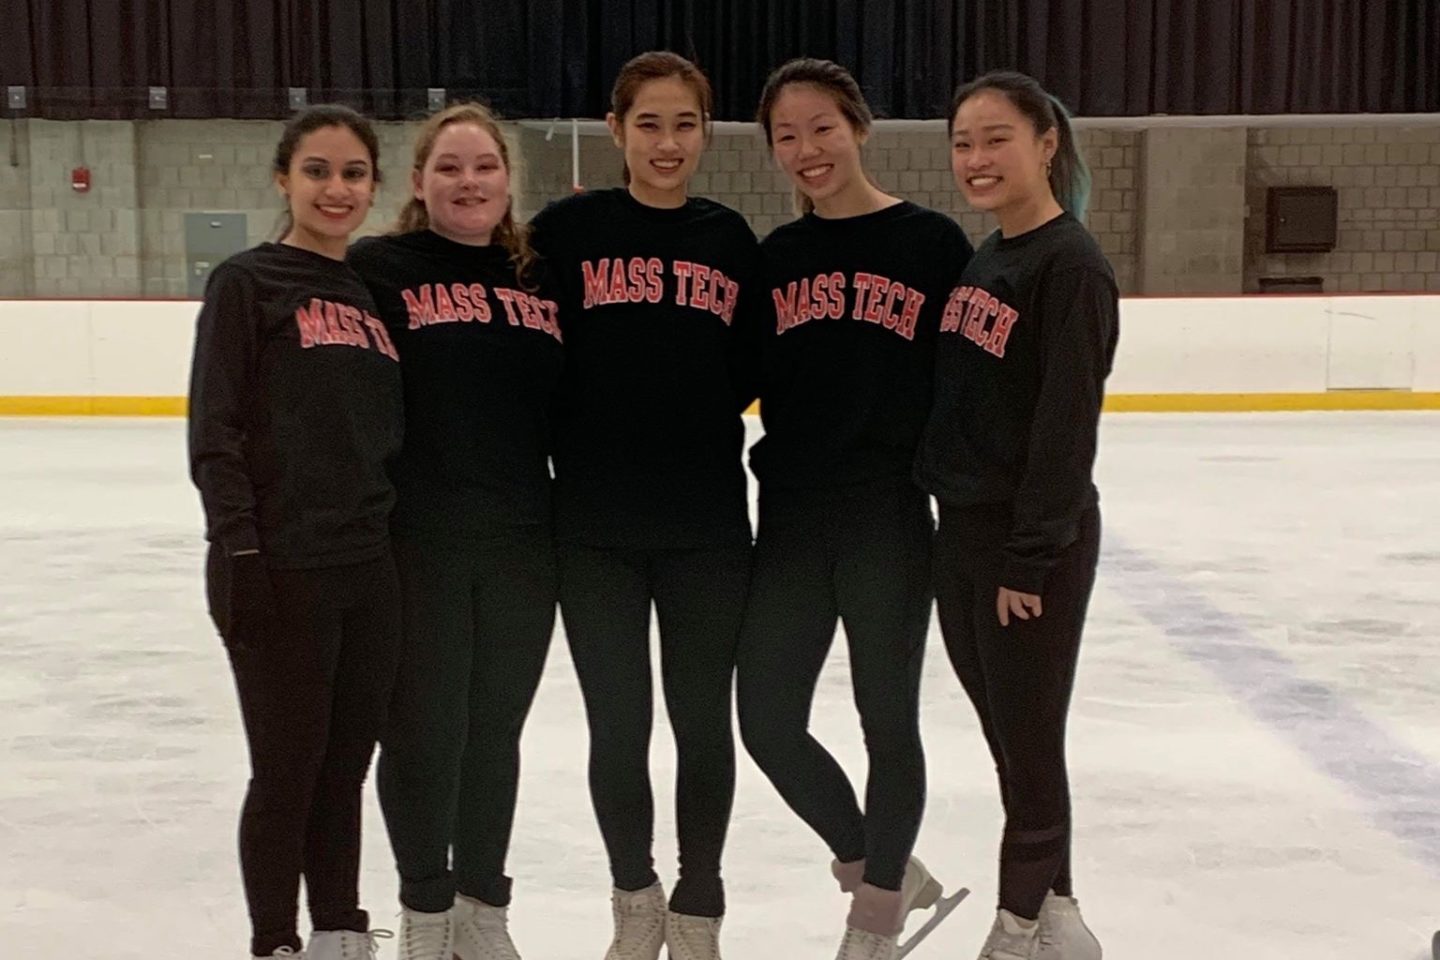 Five figure skaters posing mid-ice